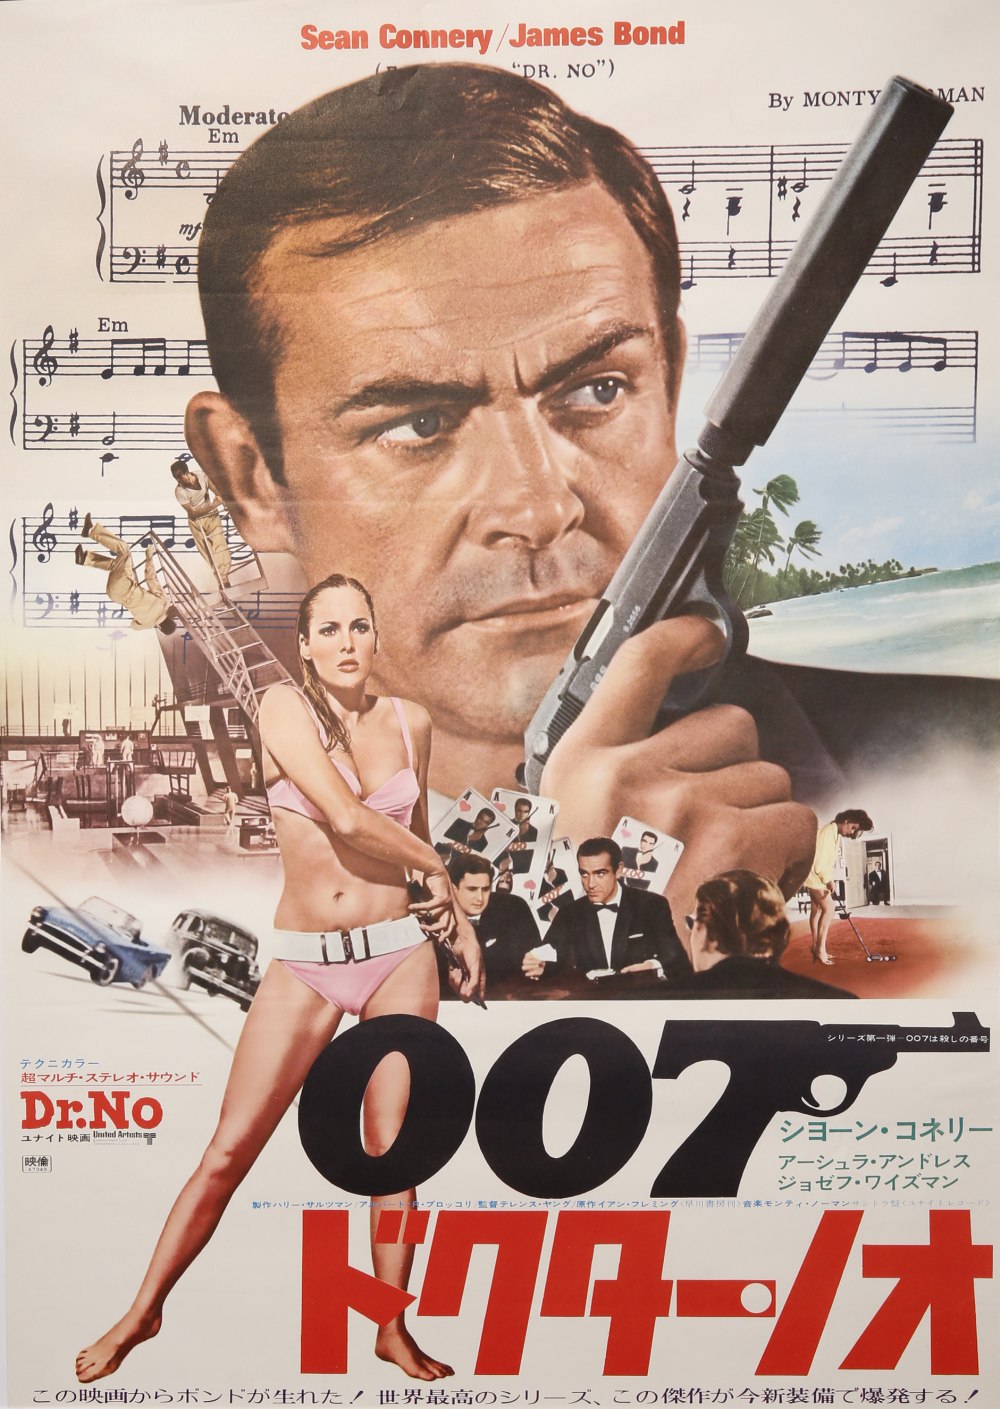 TWO JAPANESE JAMES BOND 007 POSTERS SHOWA ERA, 1972 AND 1983 Both featuring Sean Connery, the - Image 2 of 2